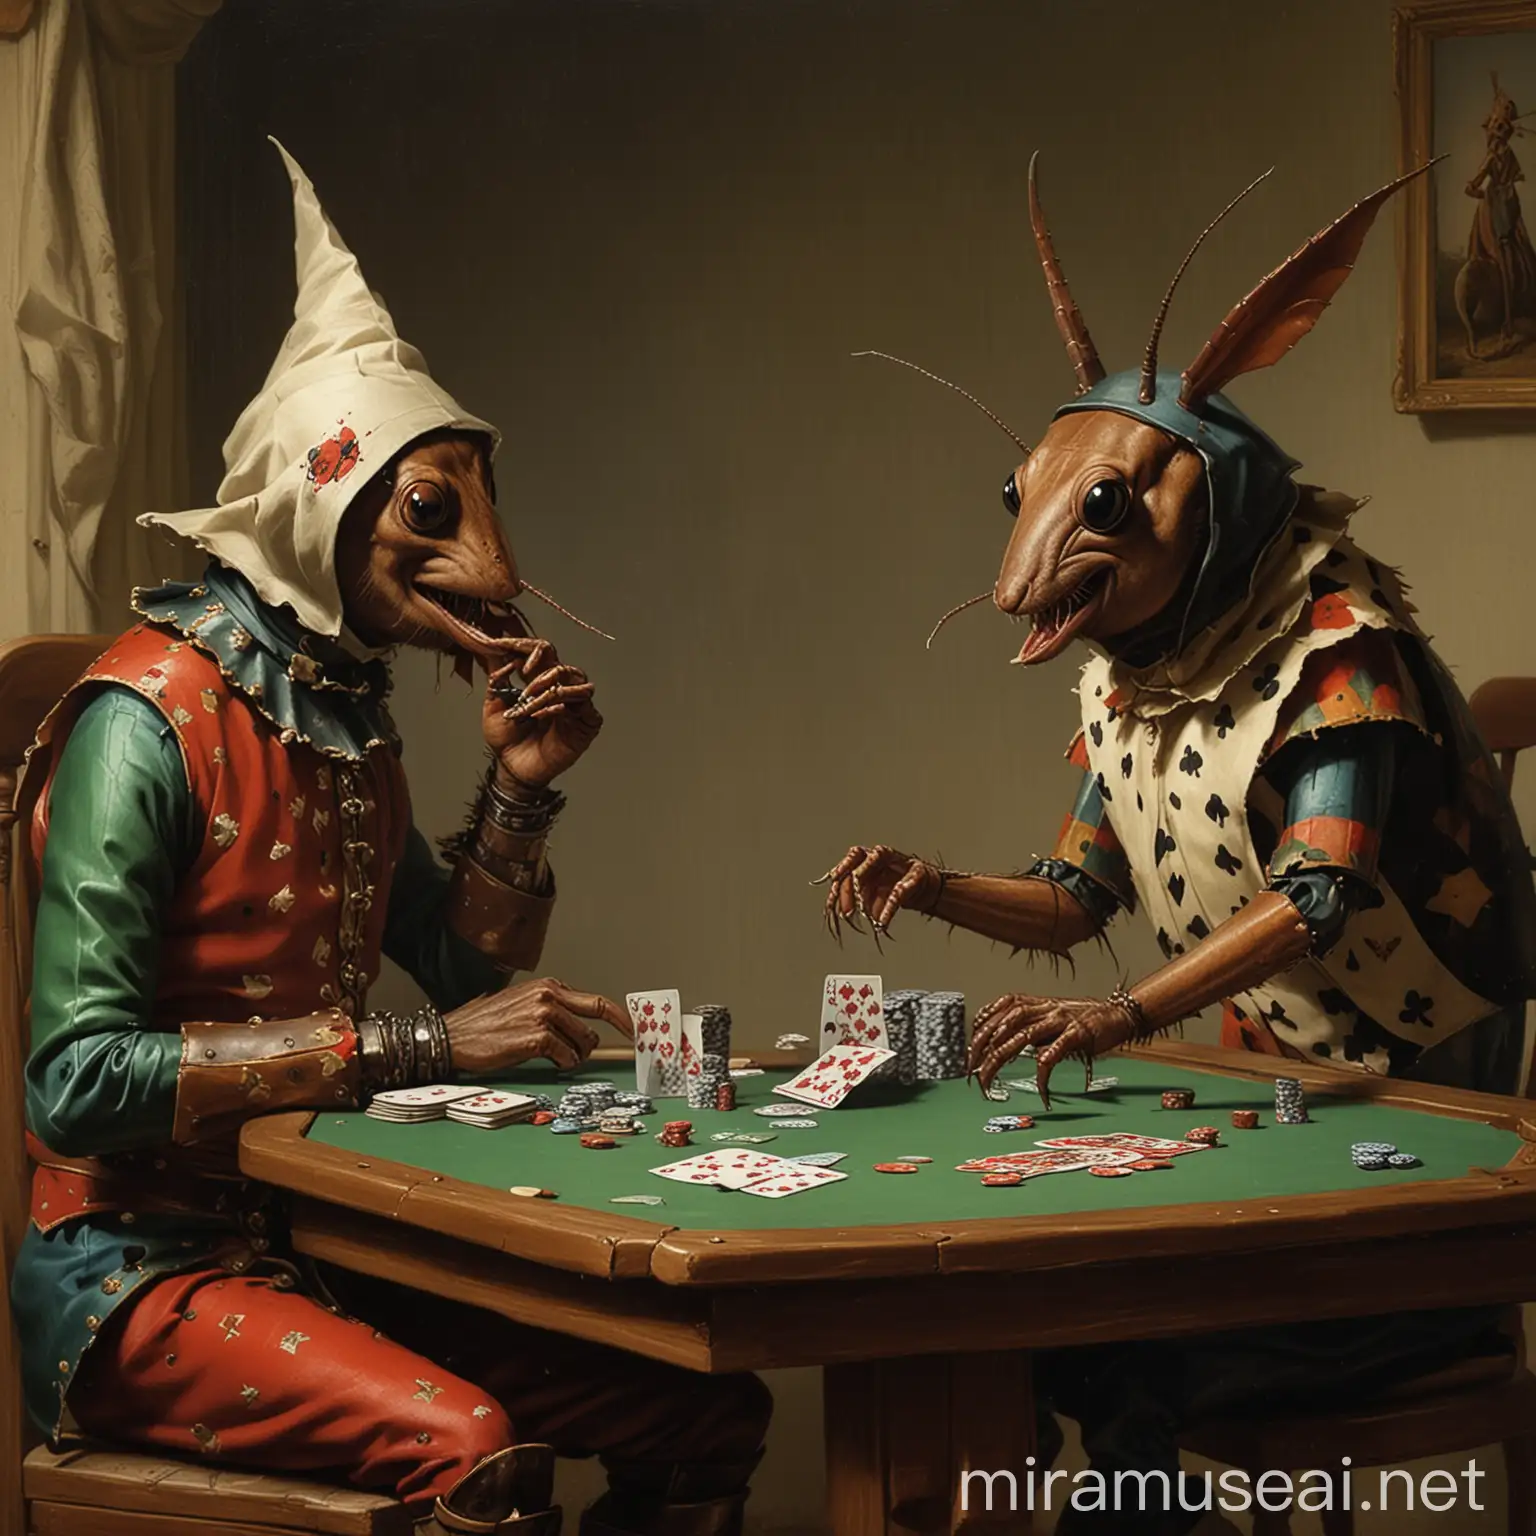 Cockroach and Jester Poker Game Art A Quirky Spin on Dogs Playing Poker